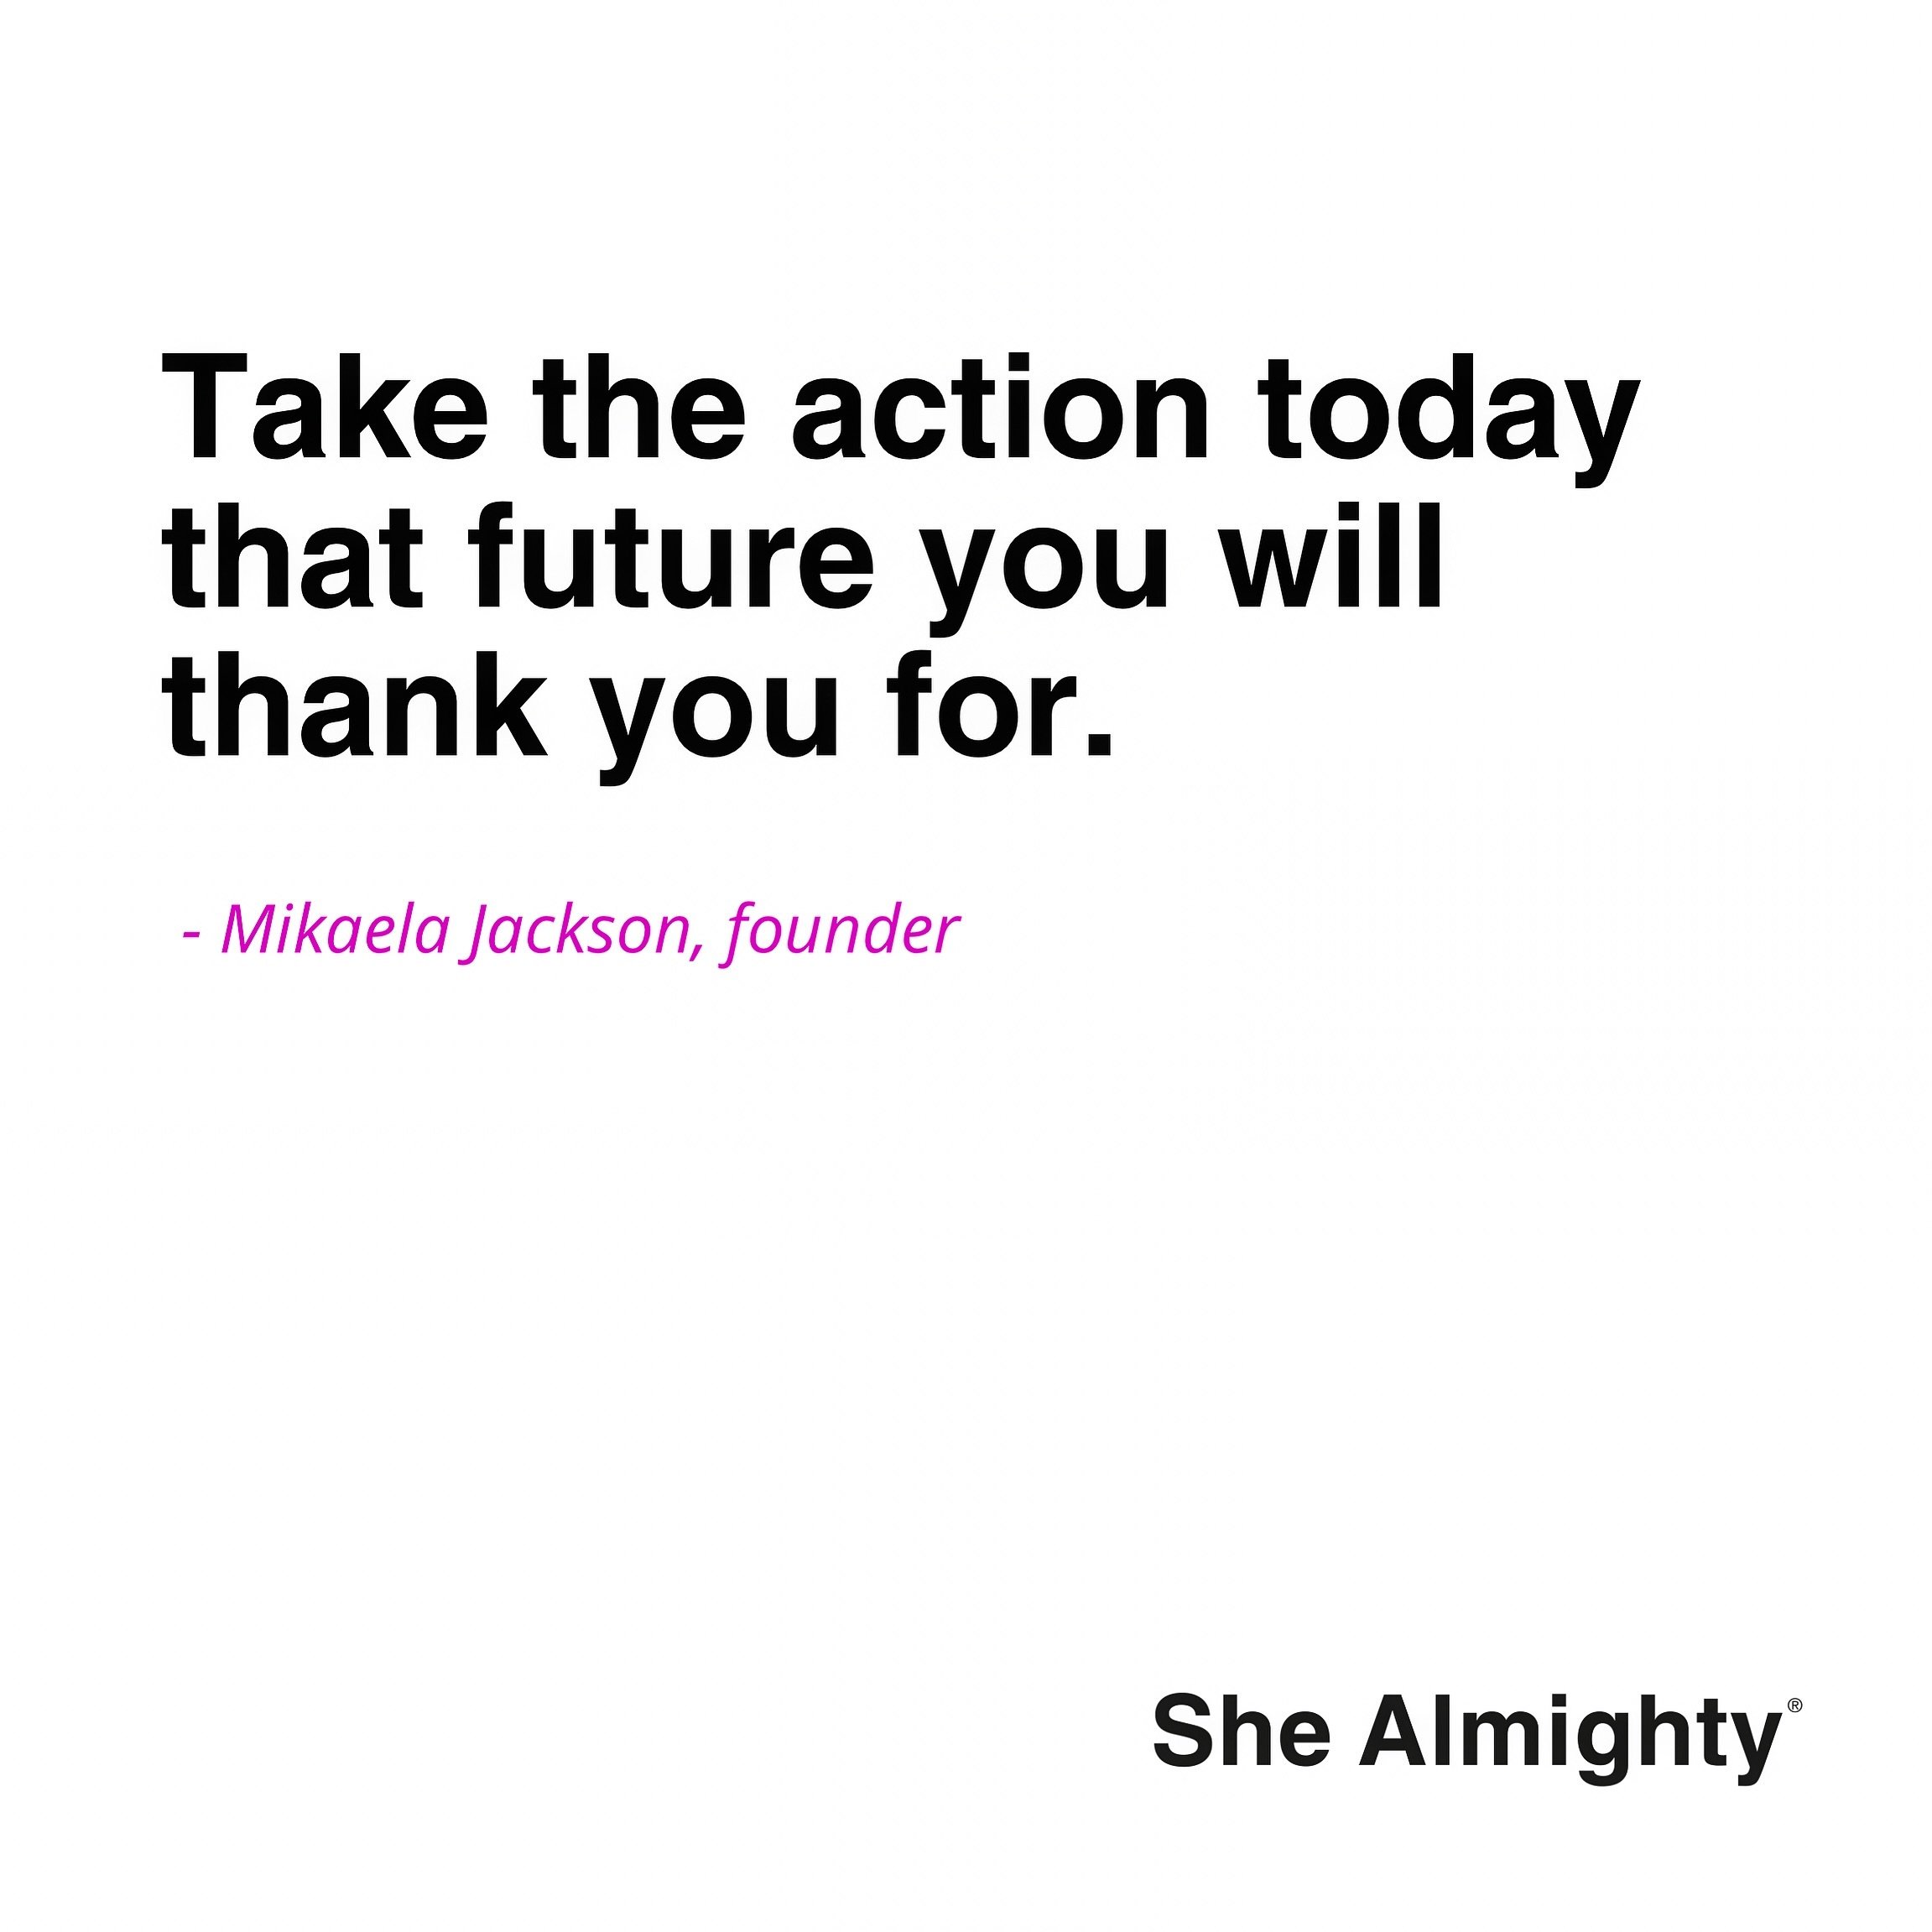 Drop a ✨Yes✨ if you're ready to take action ⬇️💫 

#womenempowerment #impact #fridaymotivation #quoteoftheday #purposedriven #shealmighty